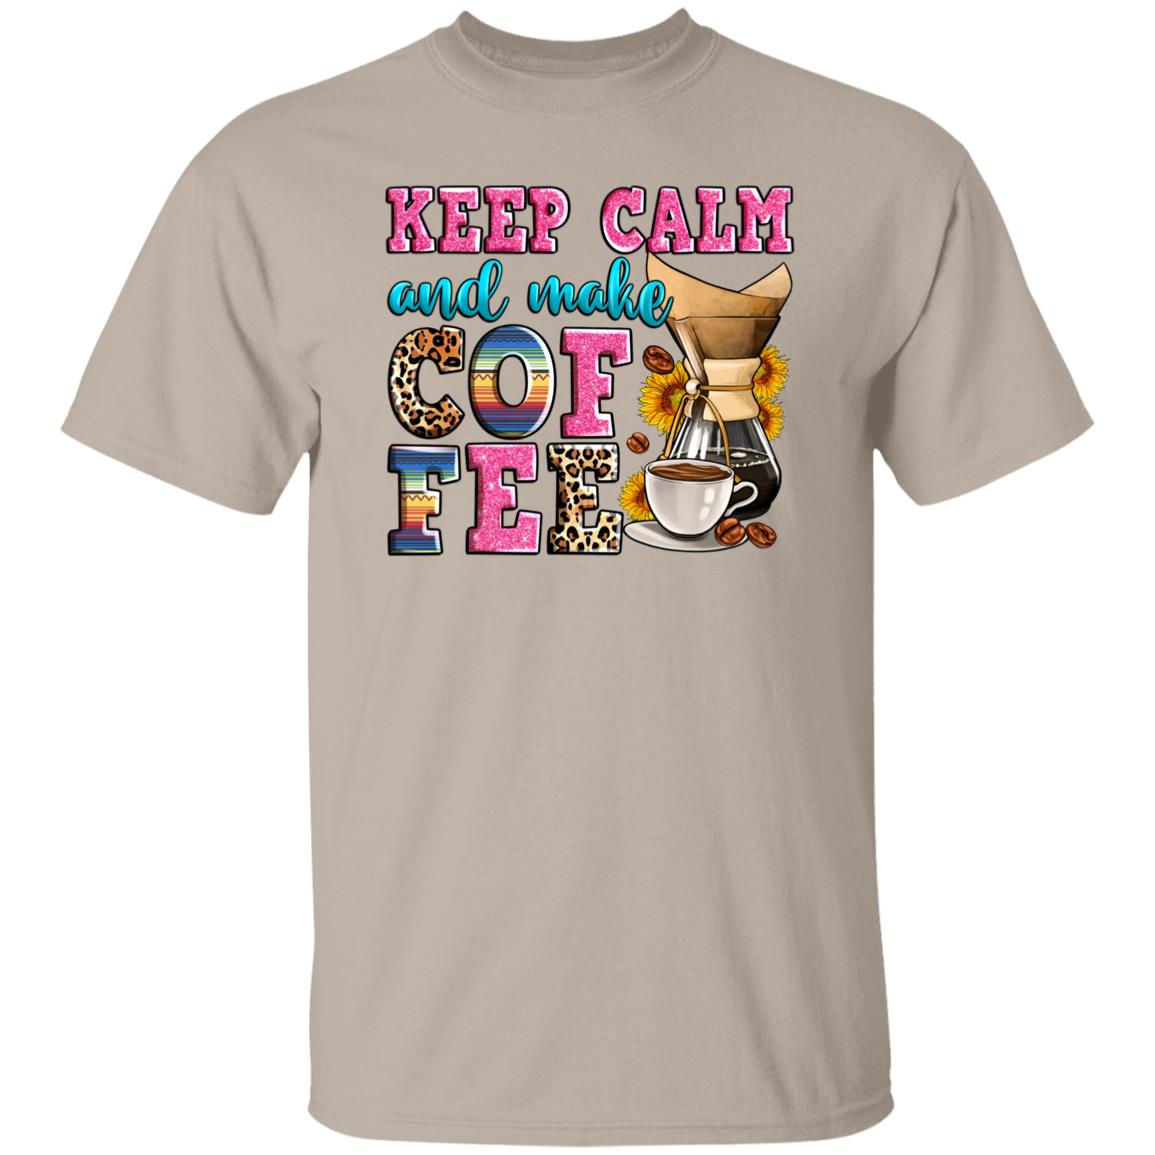 Keep calm and make coffee T-Shirt gift Coffee lover Unisex tee Sand White Sport Grey-Family-Gift-Planet